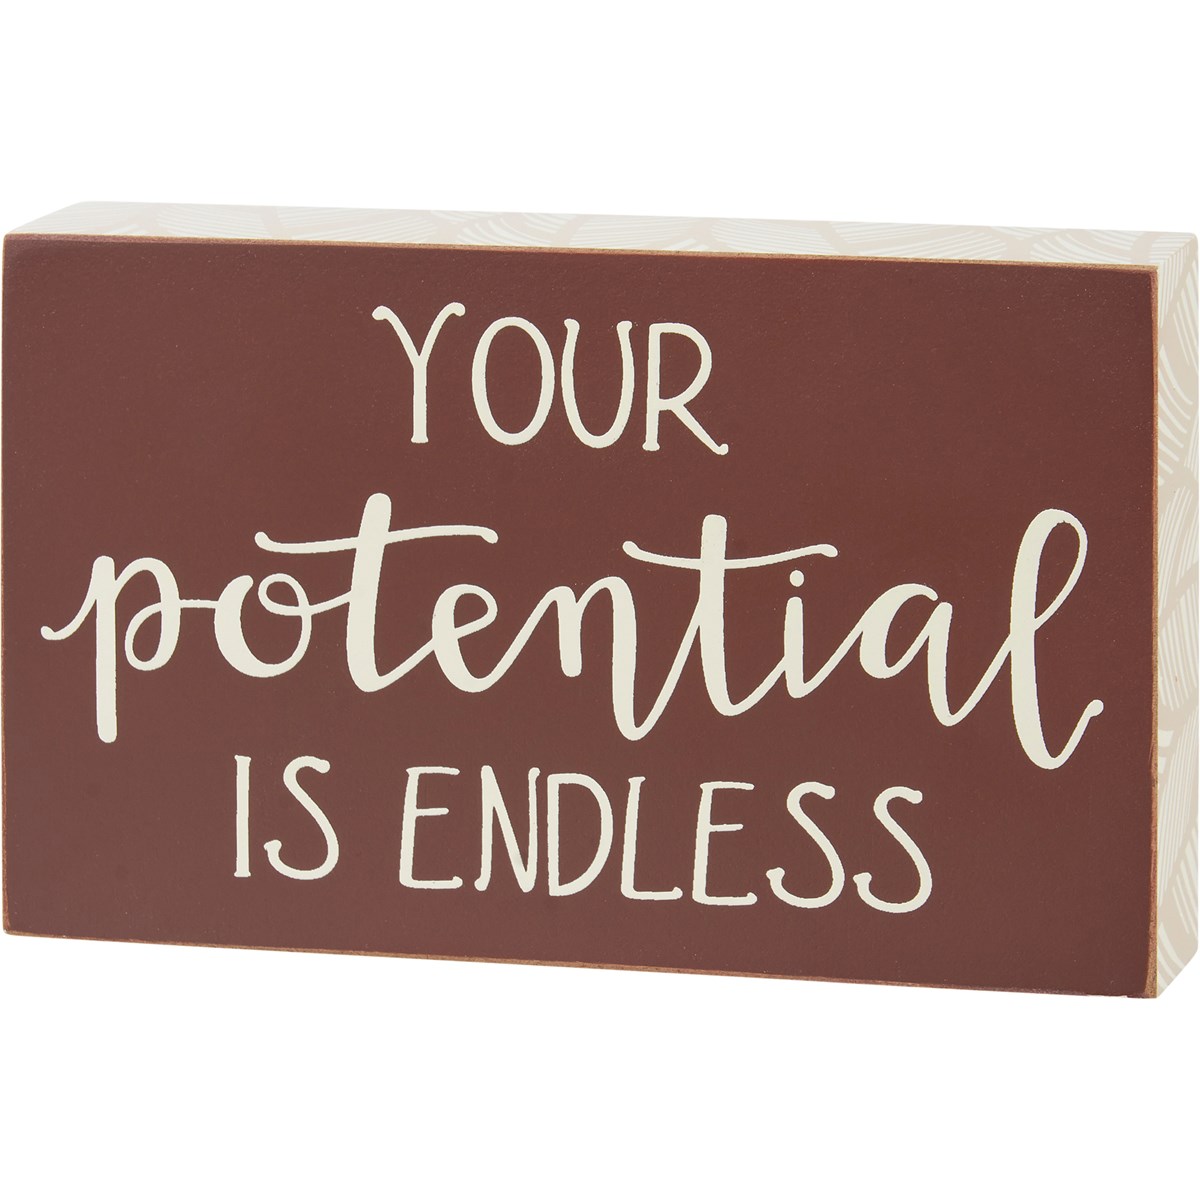 Your Potential Is Endless Block Sign - Wood